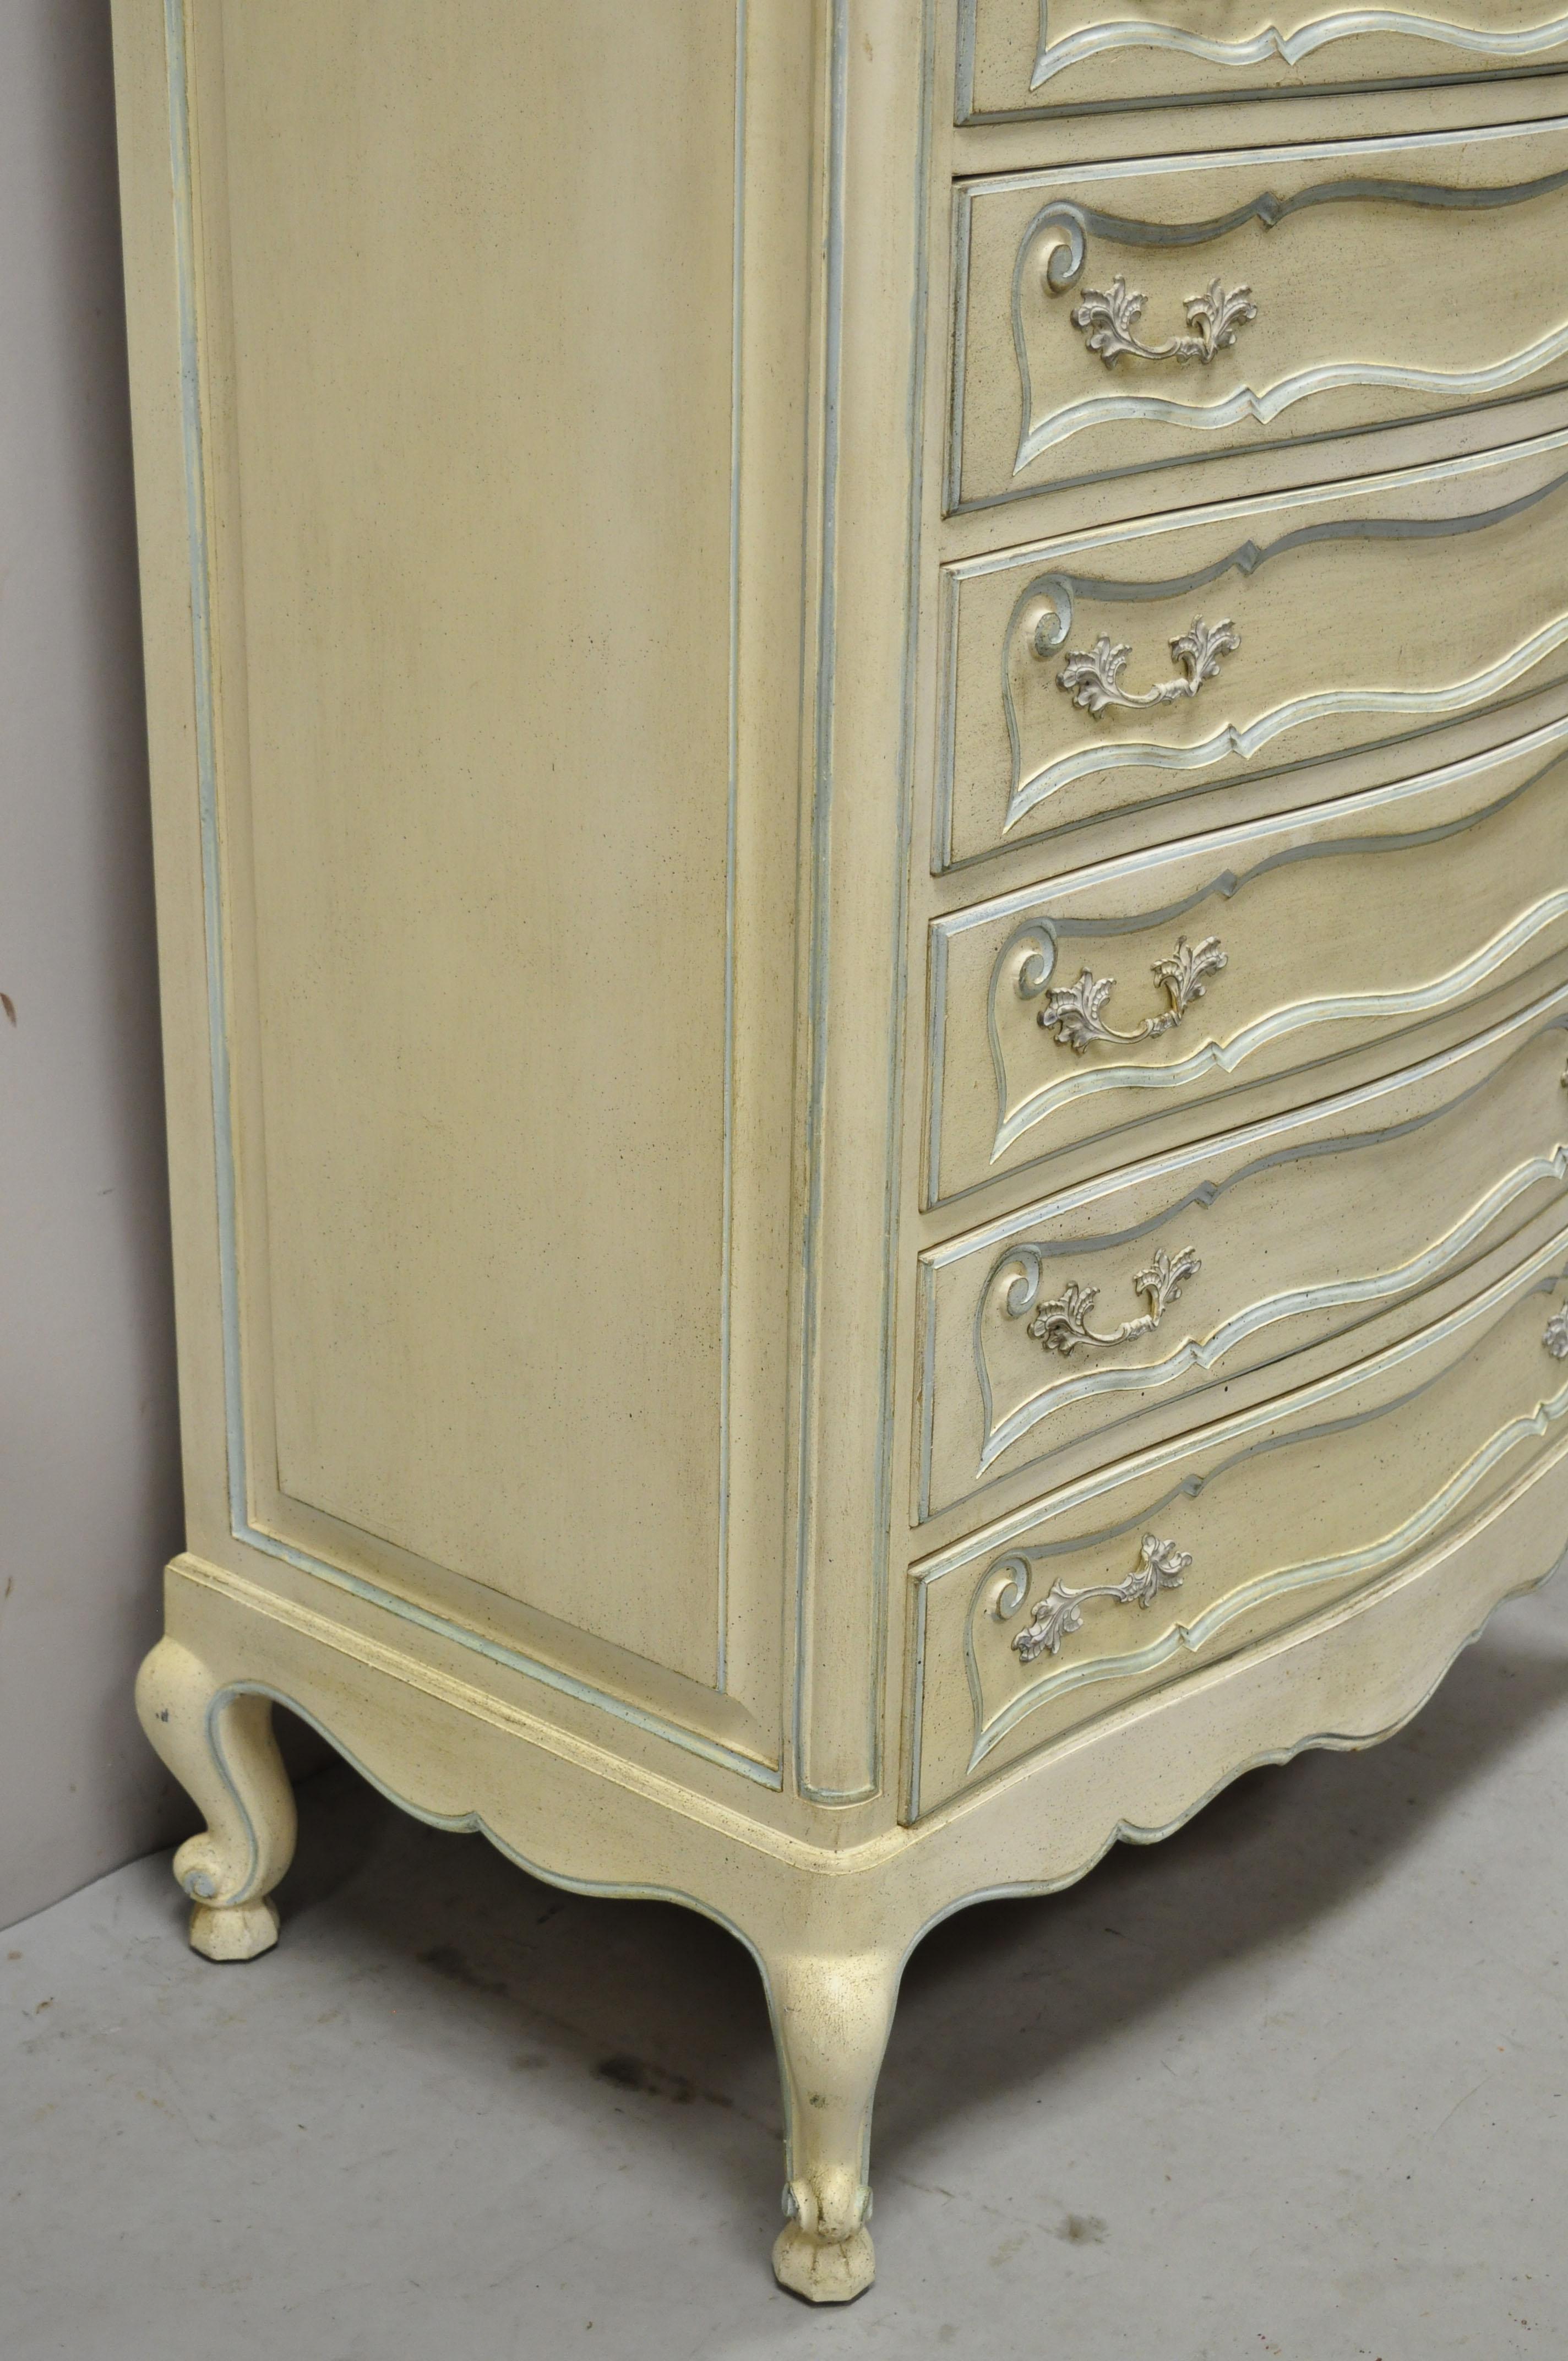 North American Vintage French Provincial Cream Blue Paint Tall Narrow Custom Chest Dresser For Sale